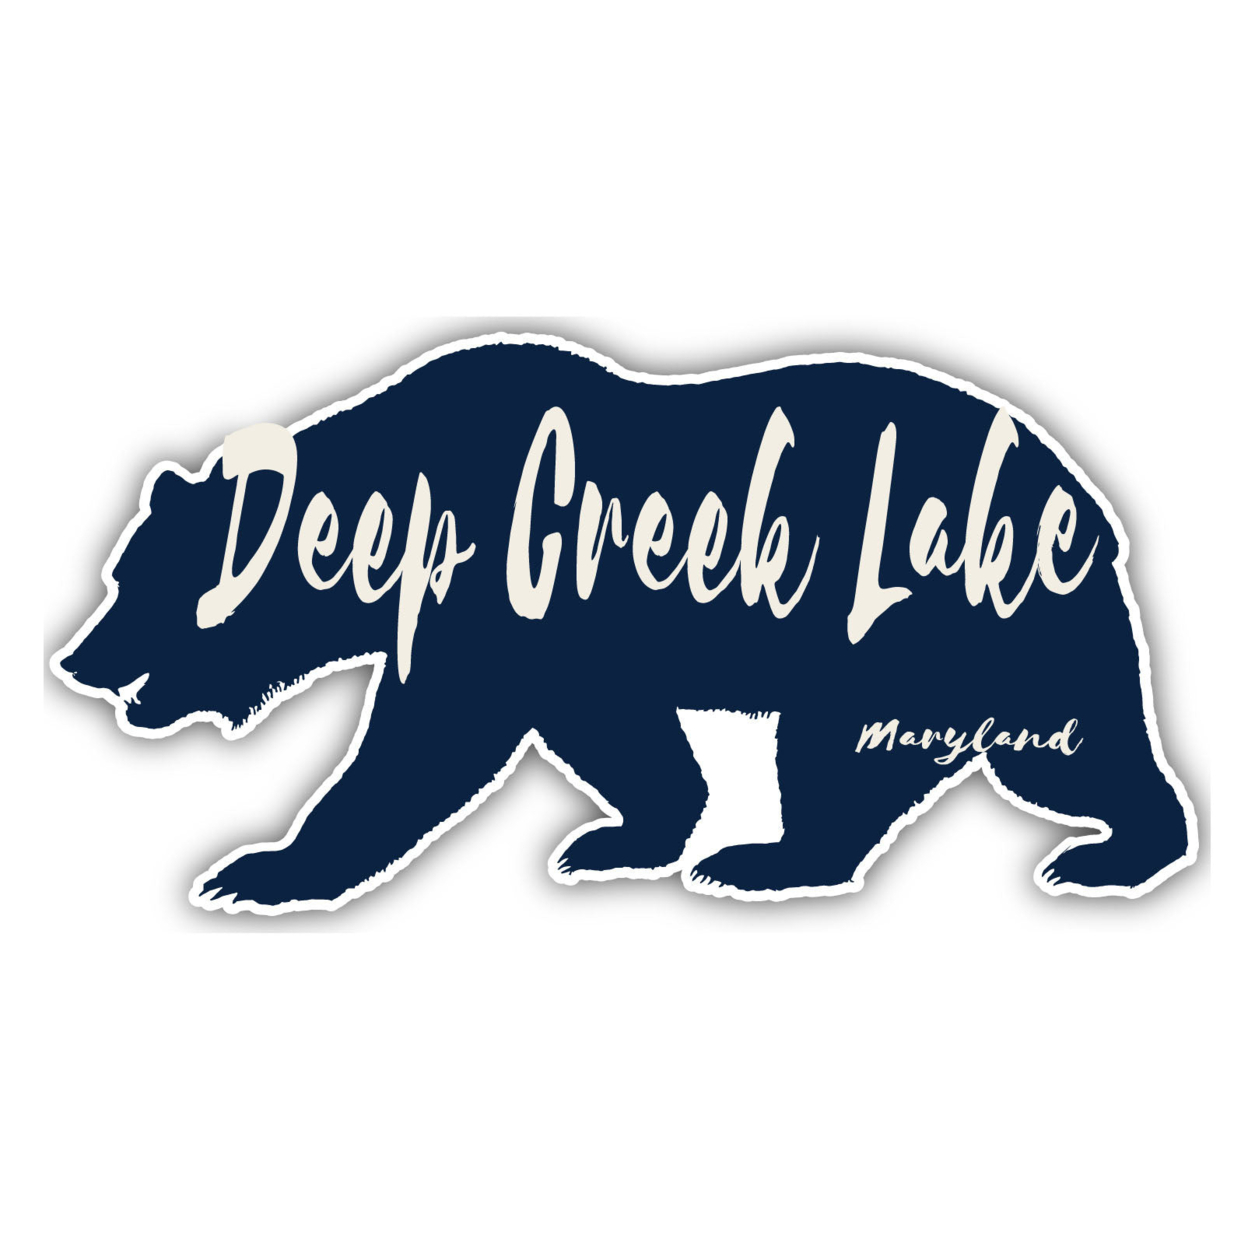 Deep Creek Lake Maryland Souvenir Decorative Stickers (Choose Theme And Size) - 4-Pack, 6-Inch, Bear